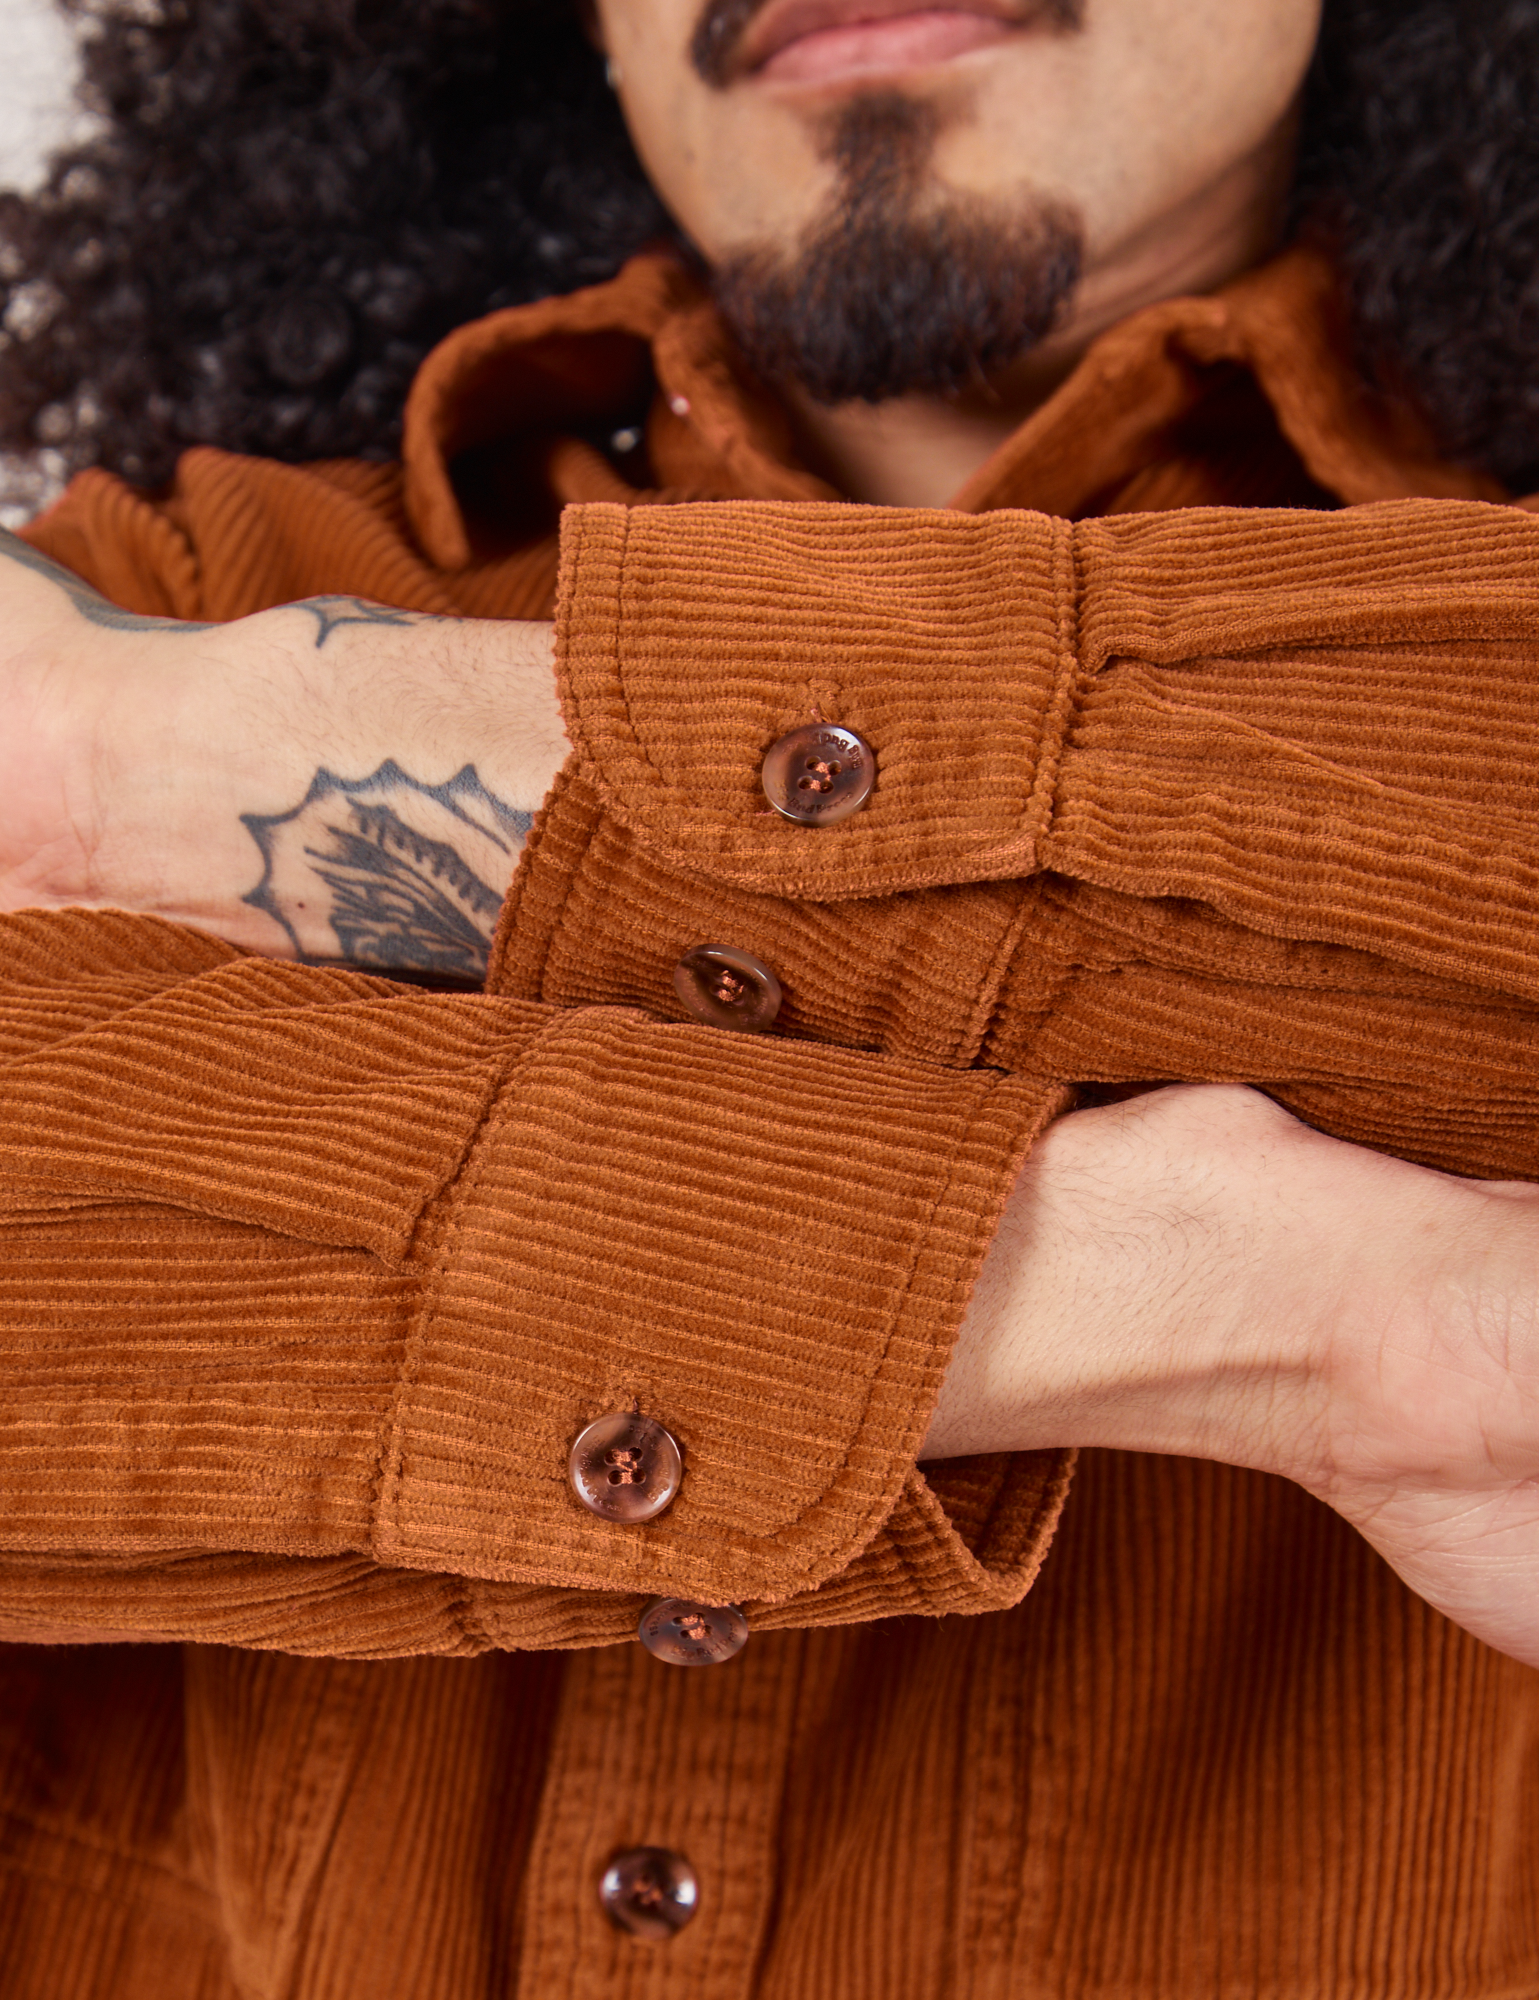 Corduroy Overshirt in Burnt Terracotta close up of sleeve cuffs showing custom tortoise shell buttons